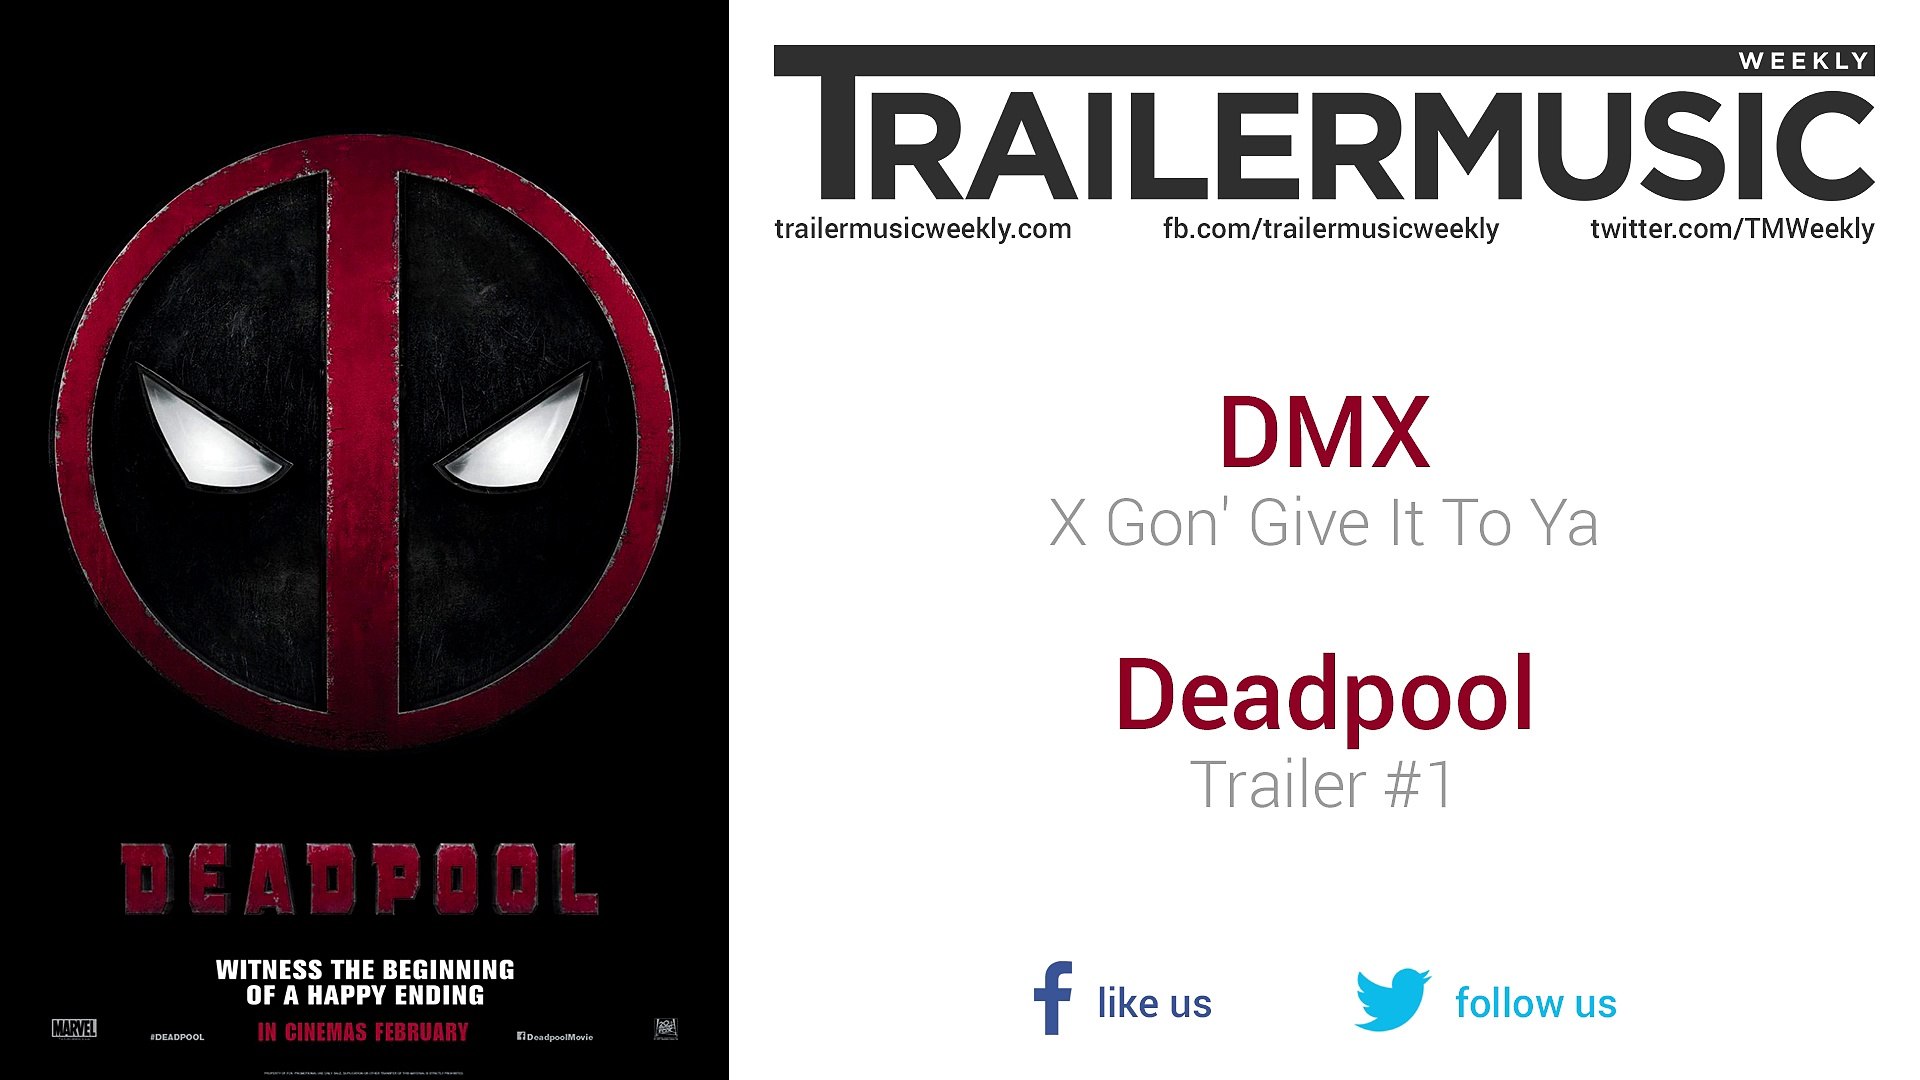 Deadpool Trailer 1 Music 3 Dmx X Gon Give It To Ya Video Dailymotion.